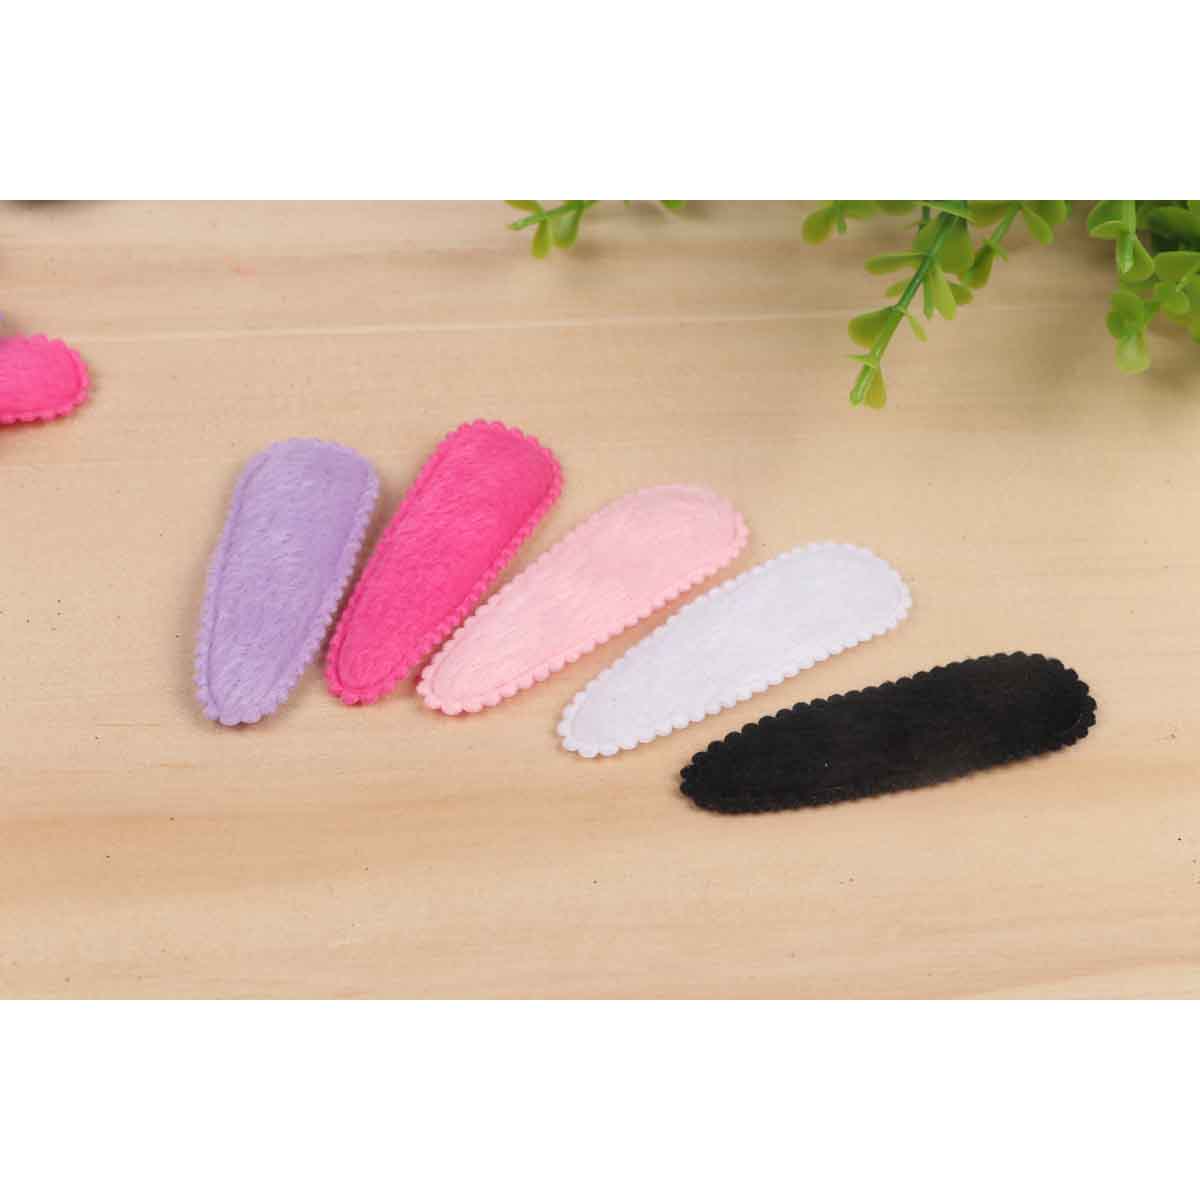 100 Padded Furry Hair Clip Covers 55mm-5 Colors